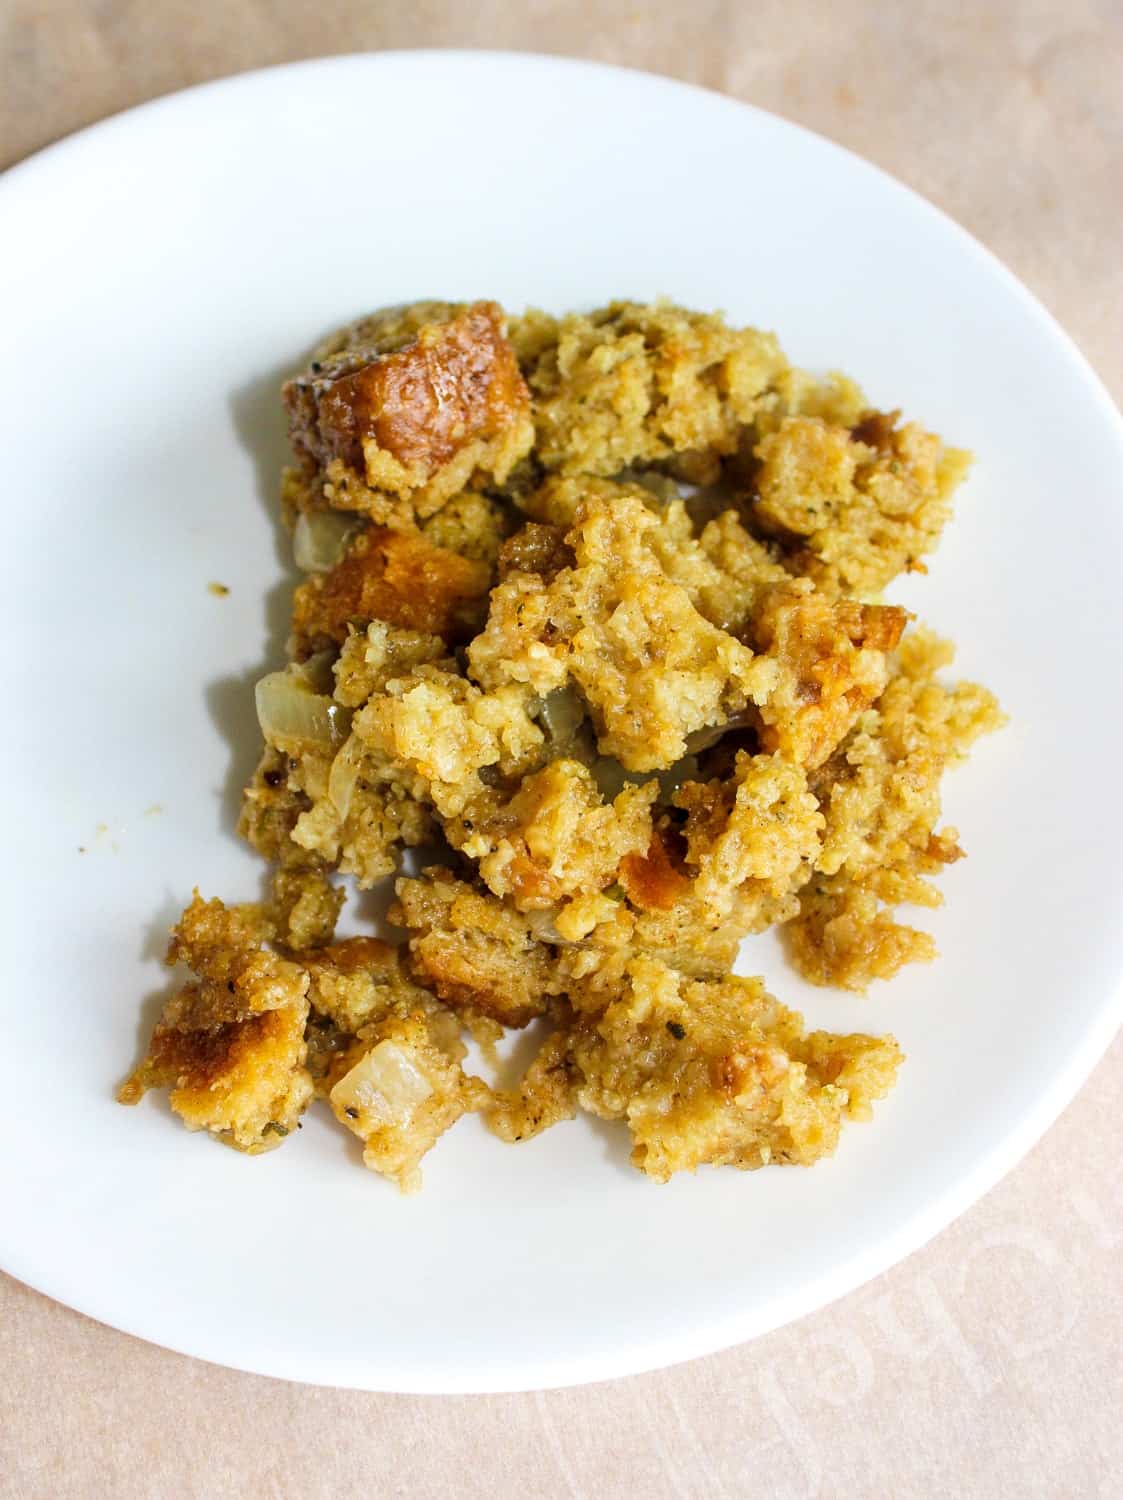 This Instant Pot stuffing is the perfect side dish for your holiday turkey or whenever you serve up chicken.